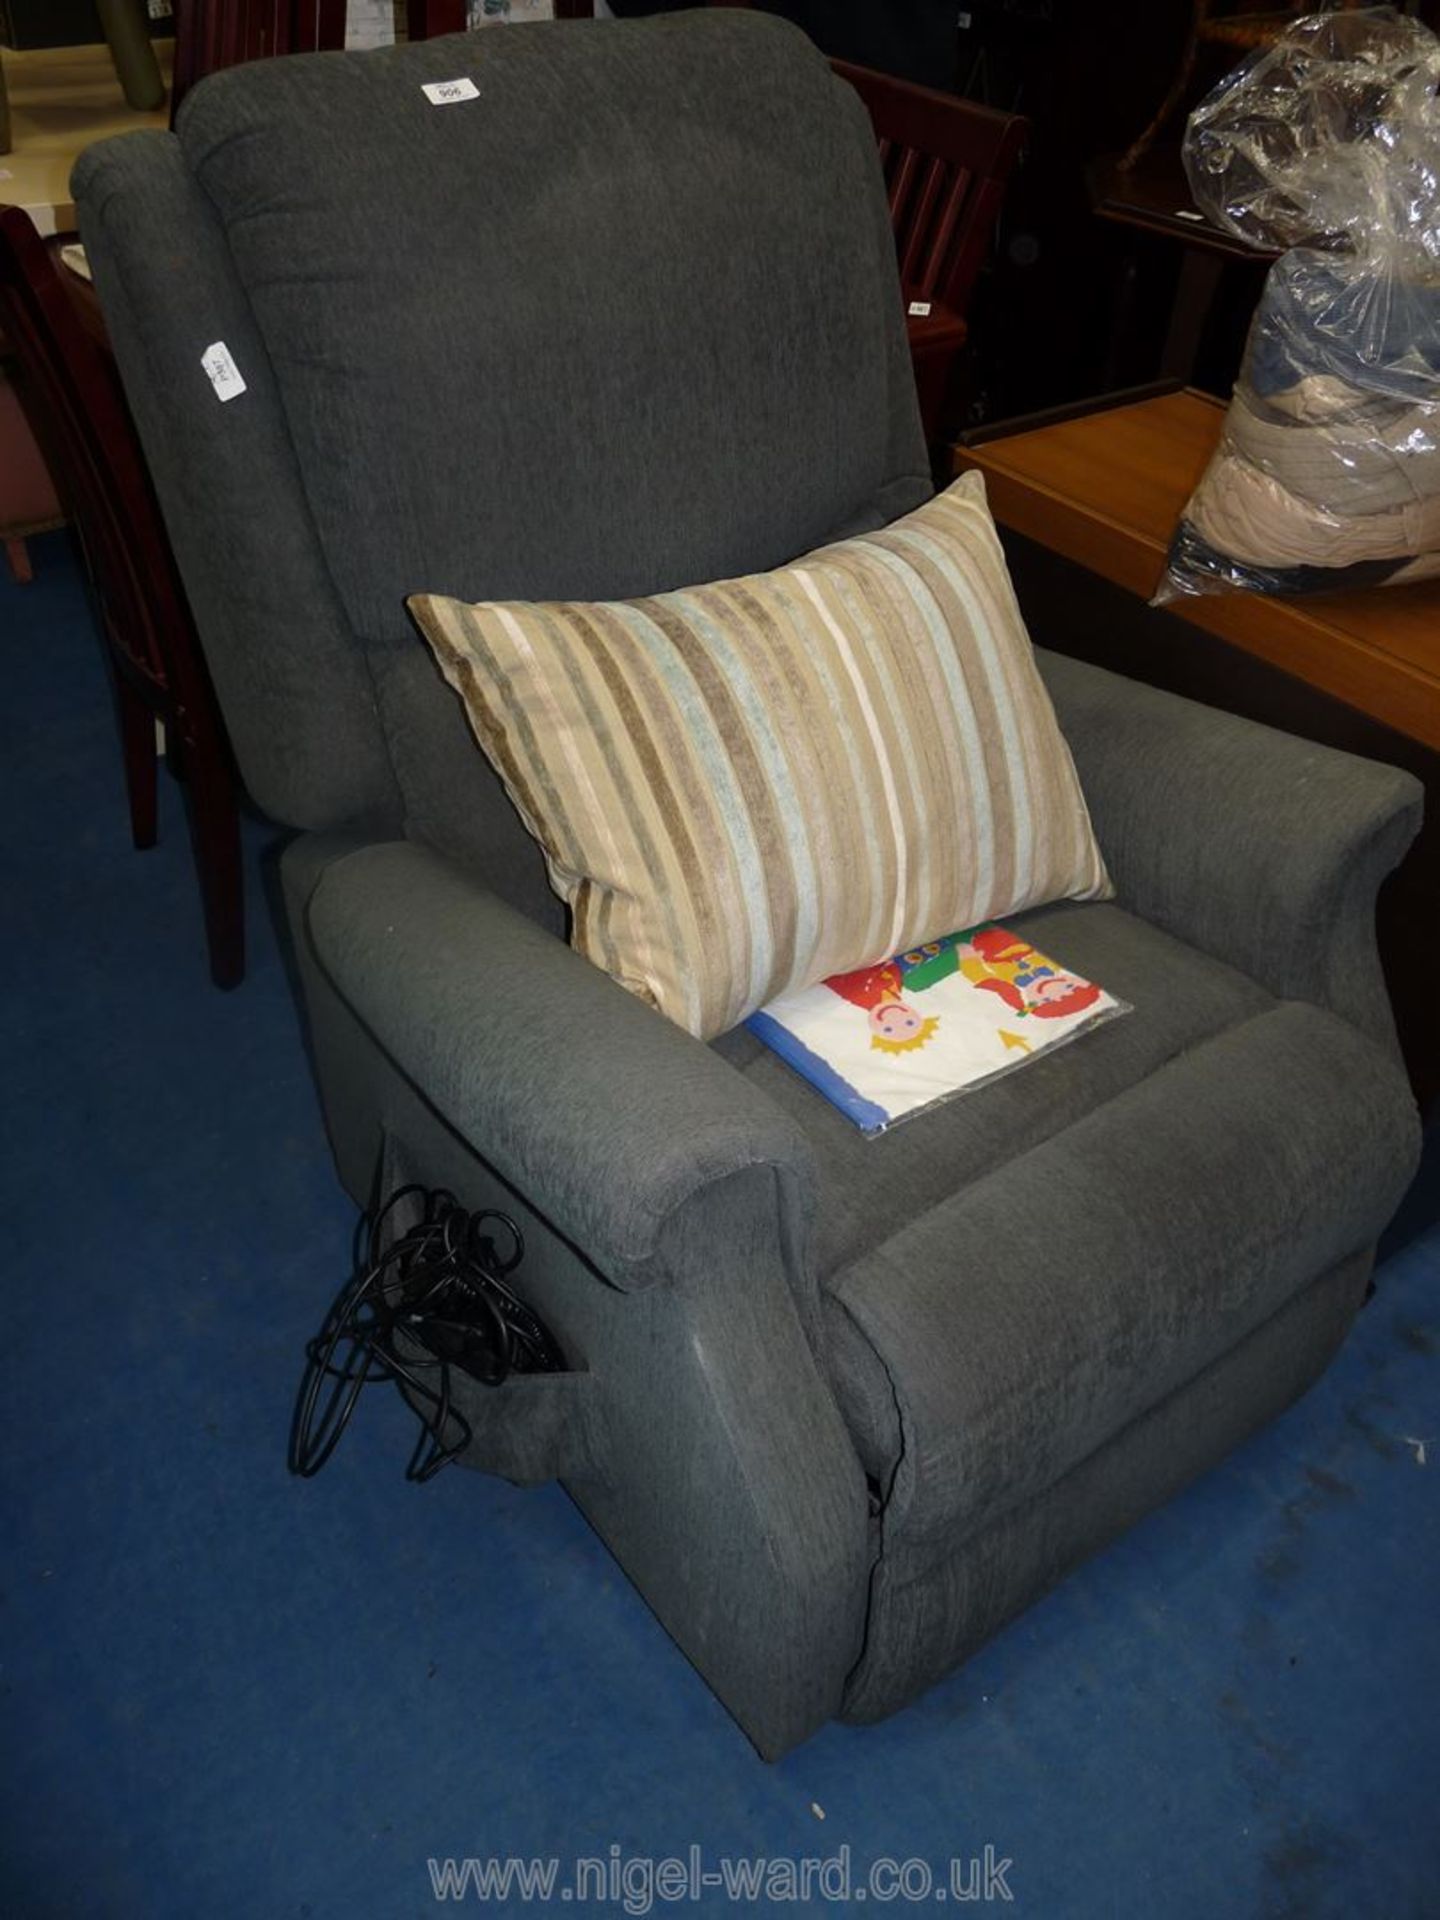 An electric reclining chair in blue/grey upholstery with controls.